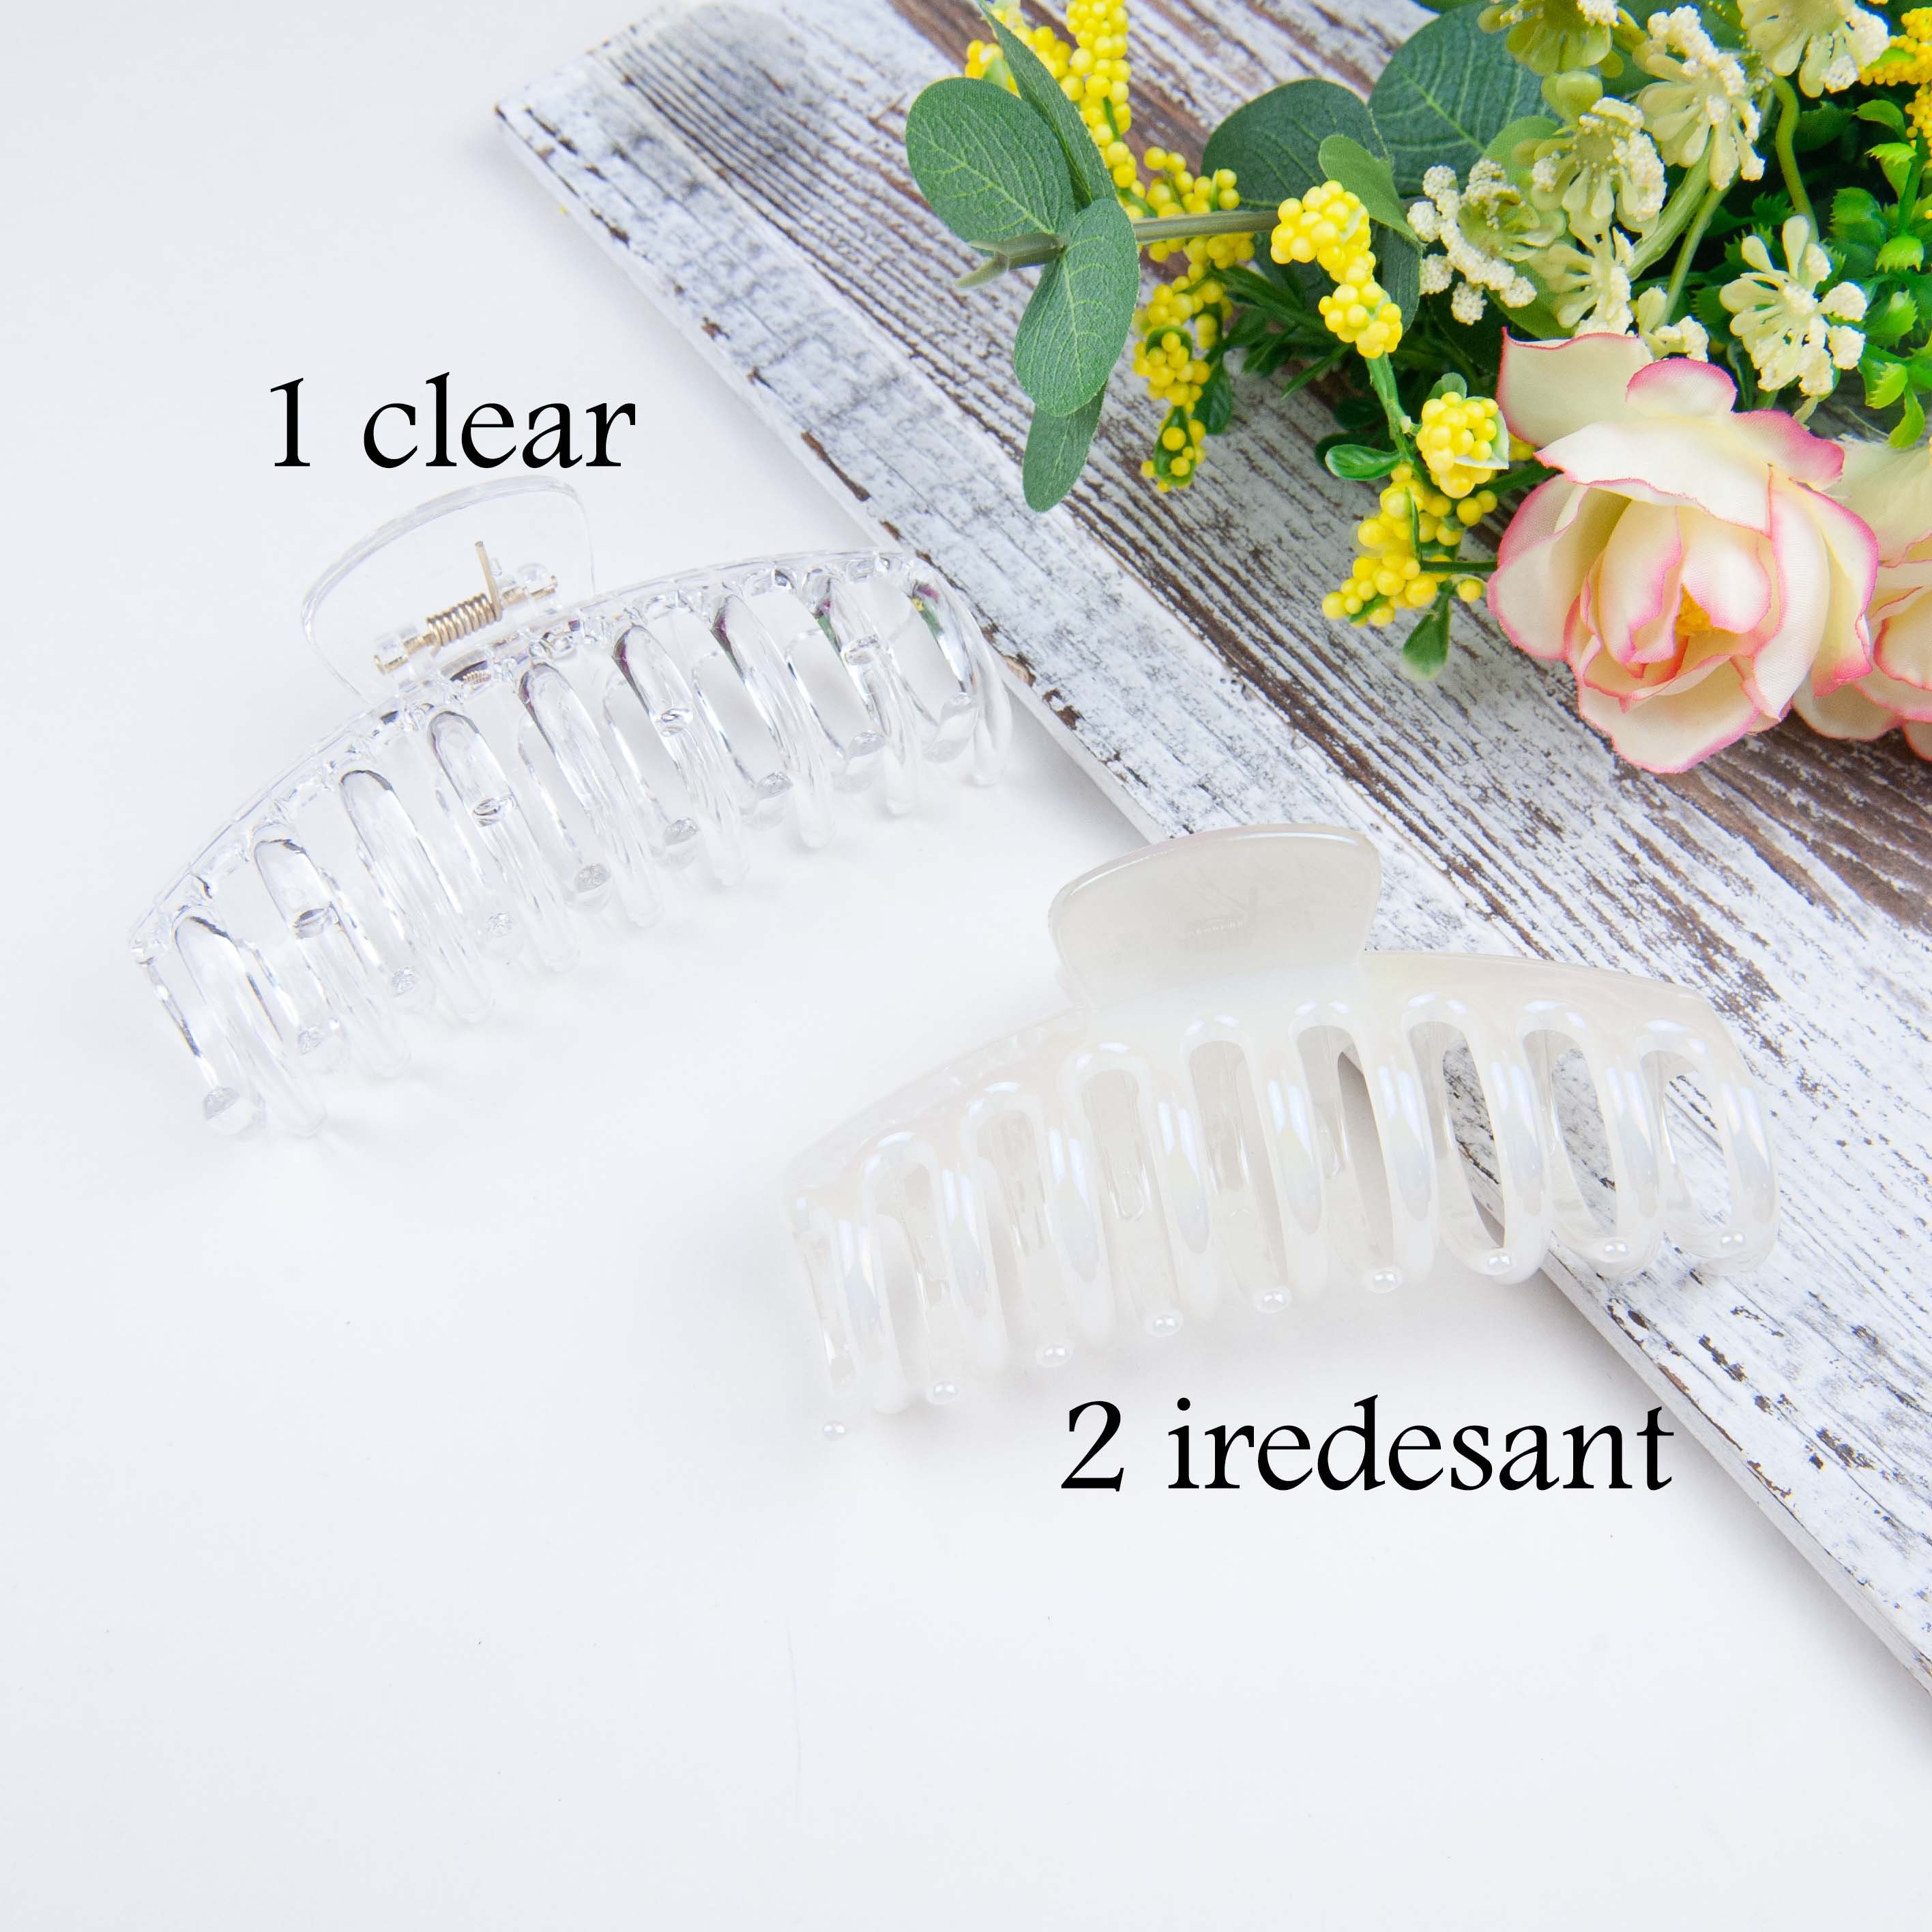 Buy Square Hollow Hair Claw Claw Clips Aesthetic Cute Minimalist Online in  India 